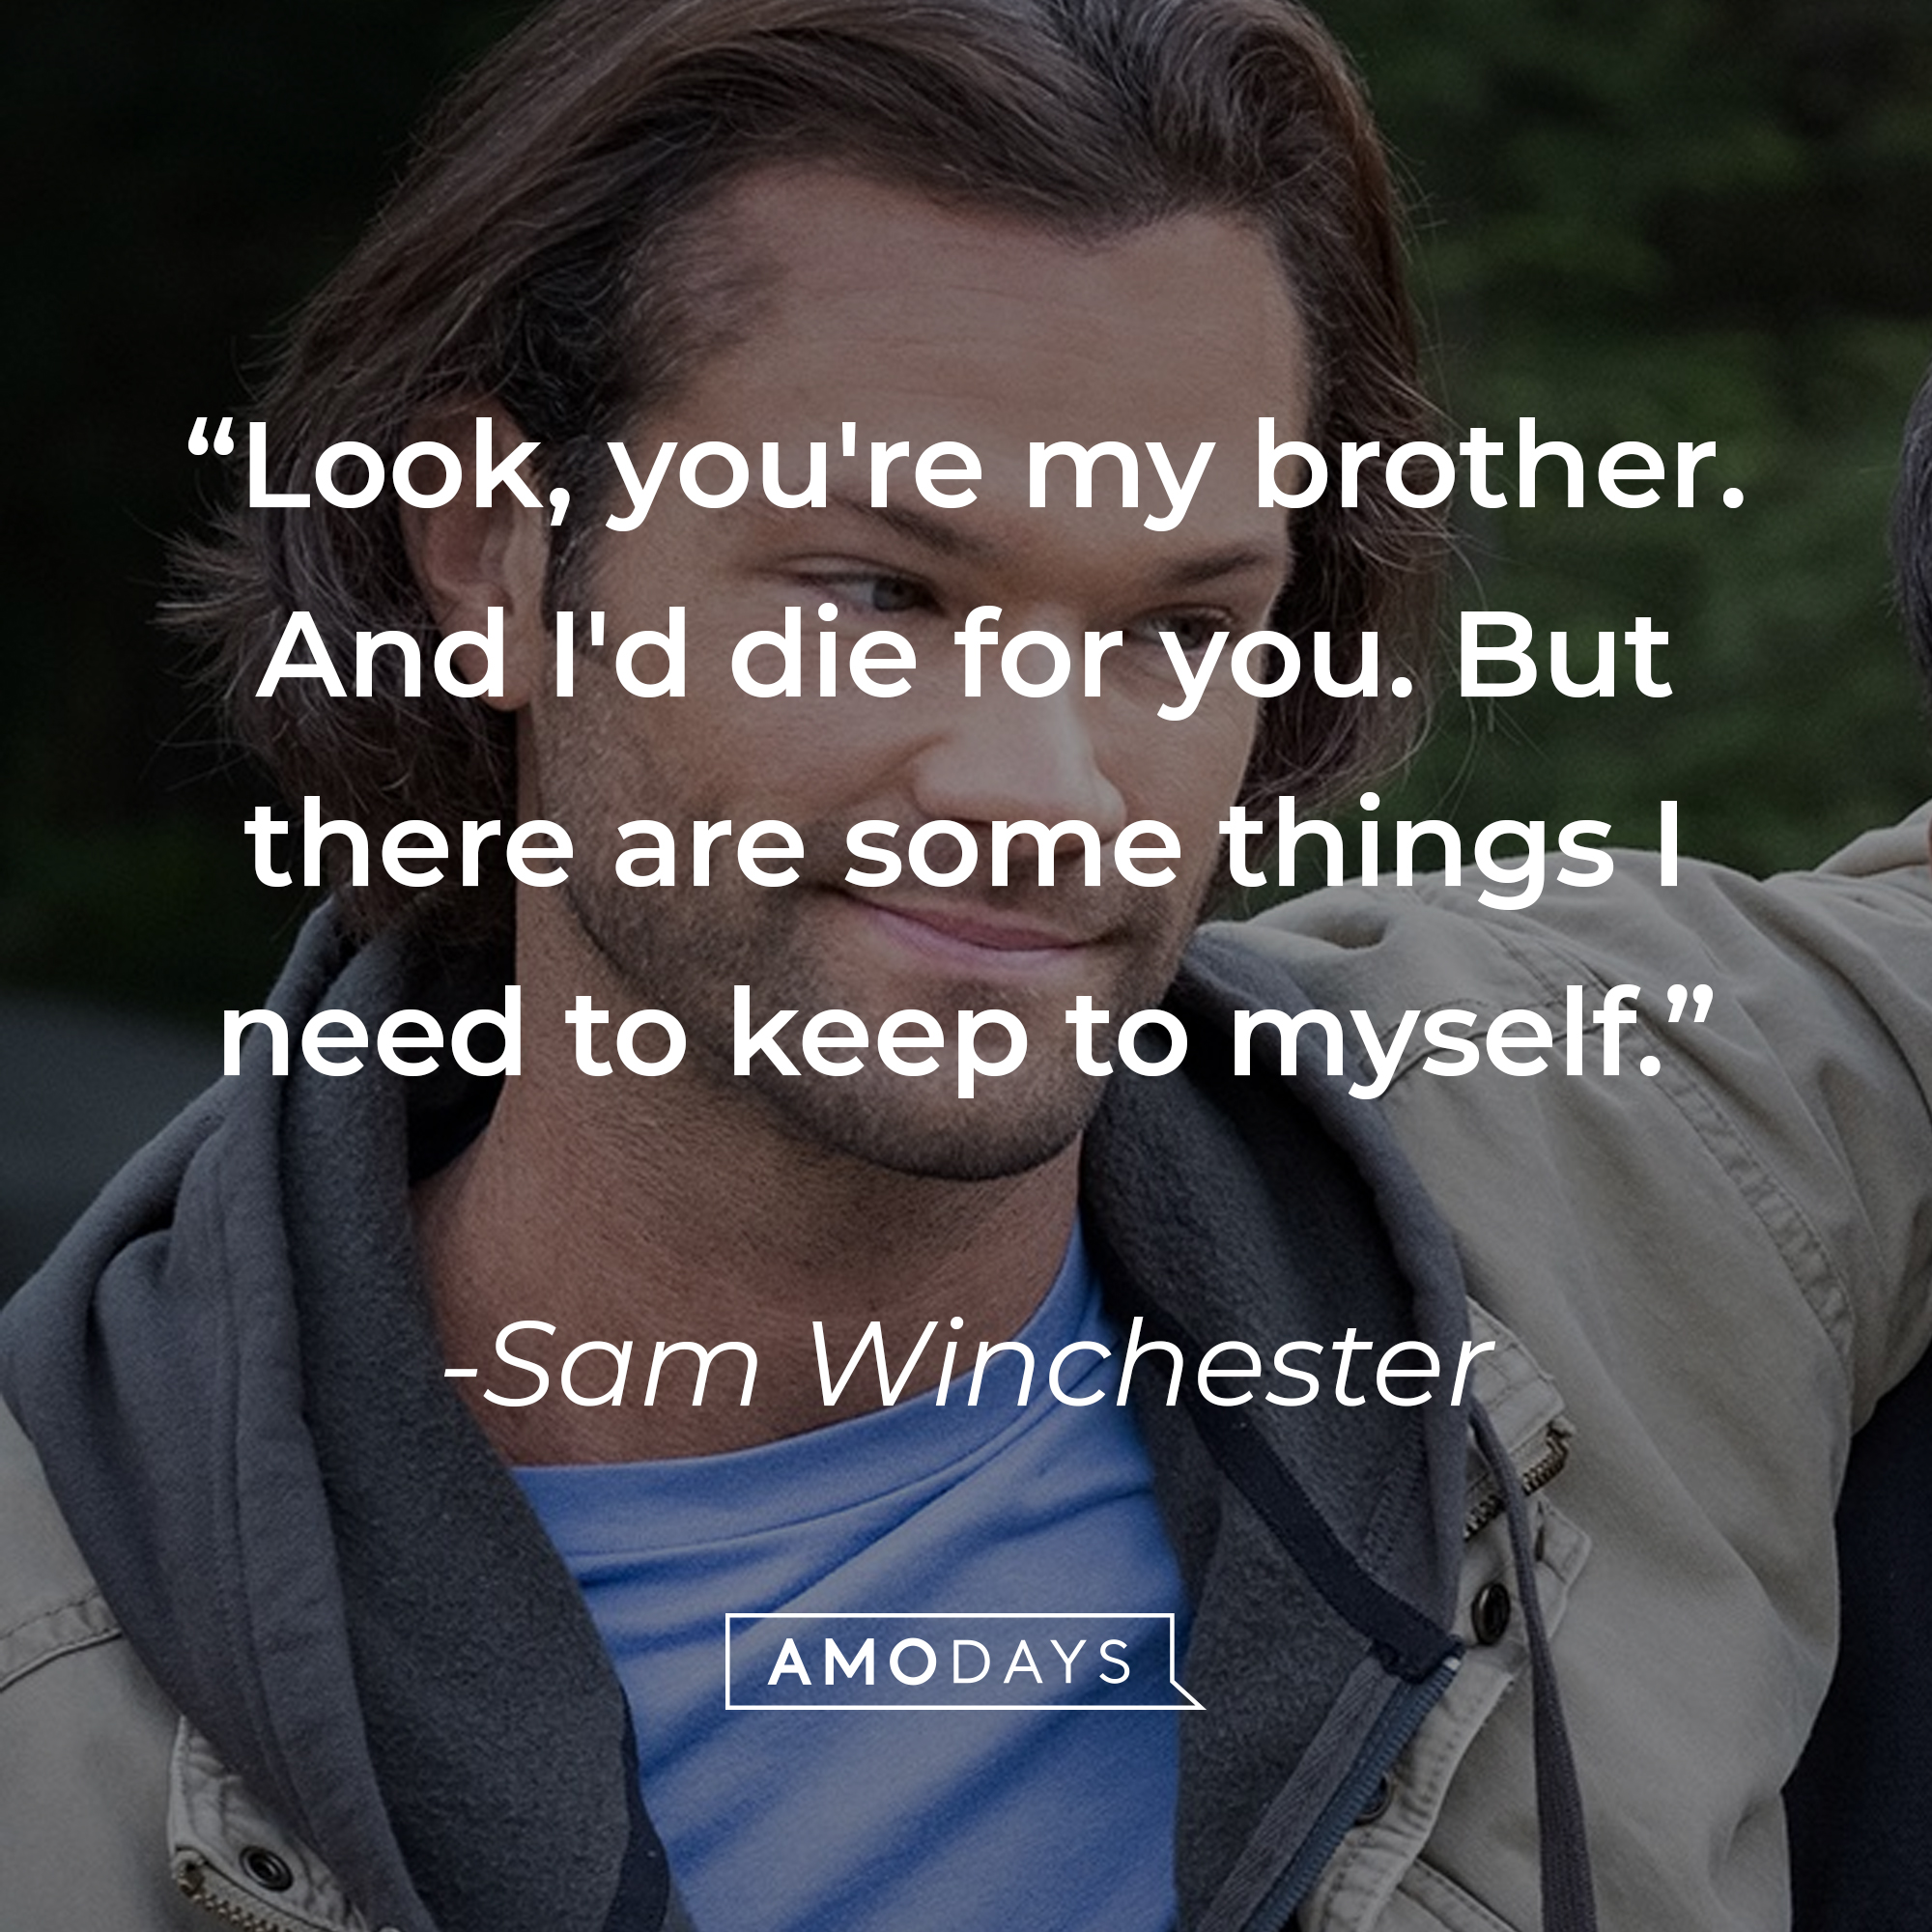 Sam Winchester's quote: "Look, you're my brother. And I'd die for you. But there are some things I need to keep to myself." | Source: Facebook.com/Supernatural